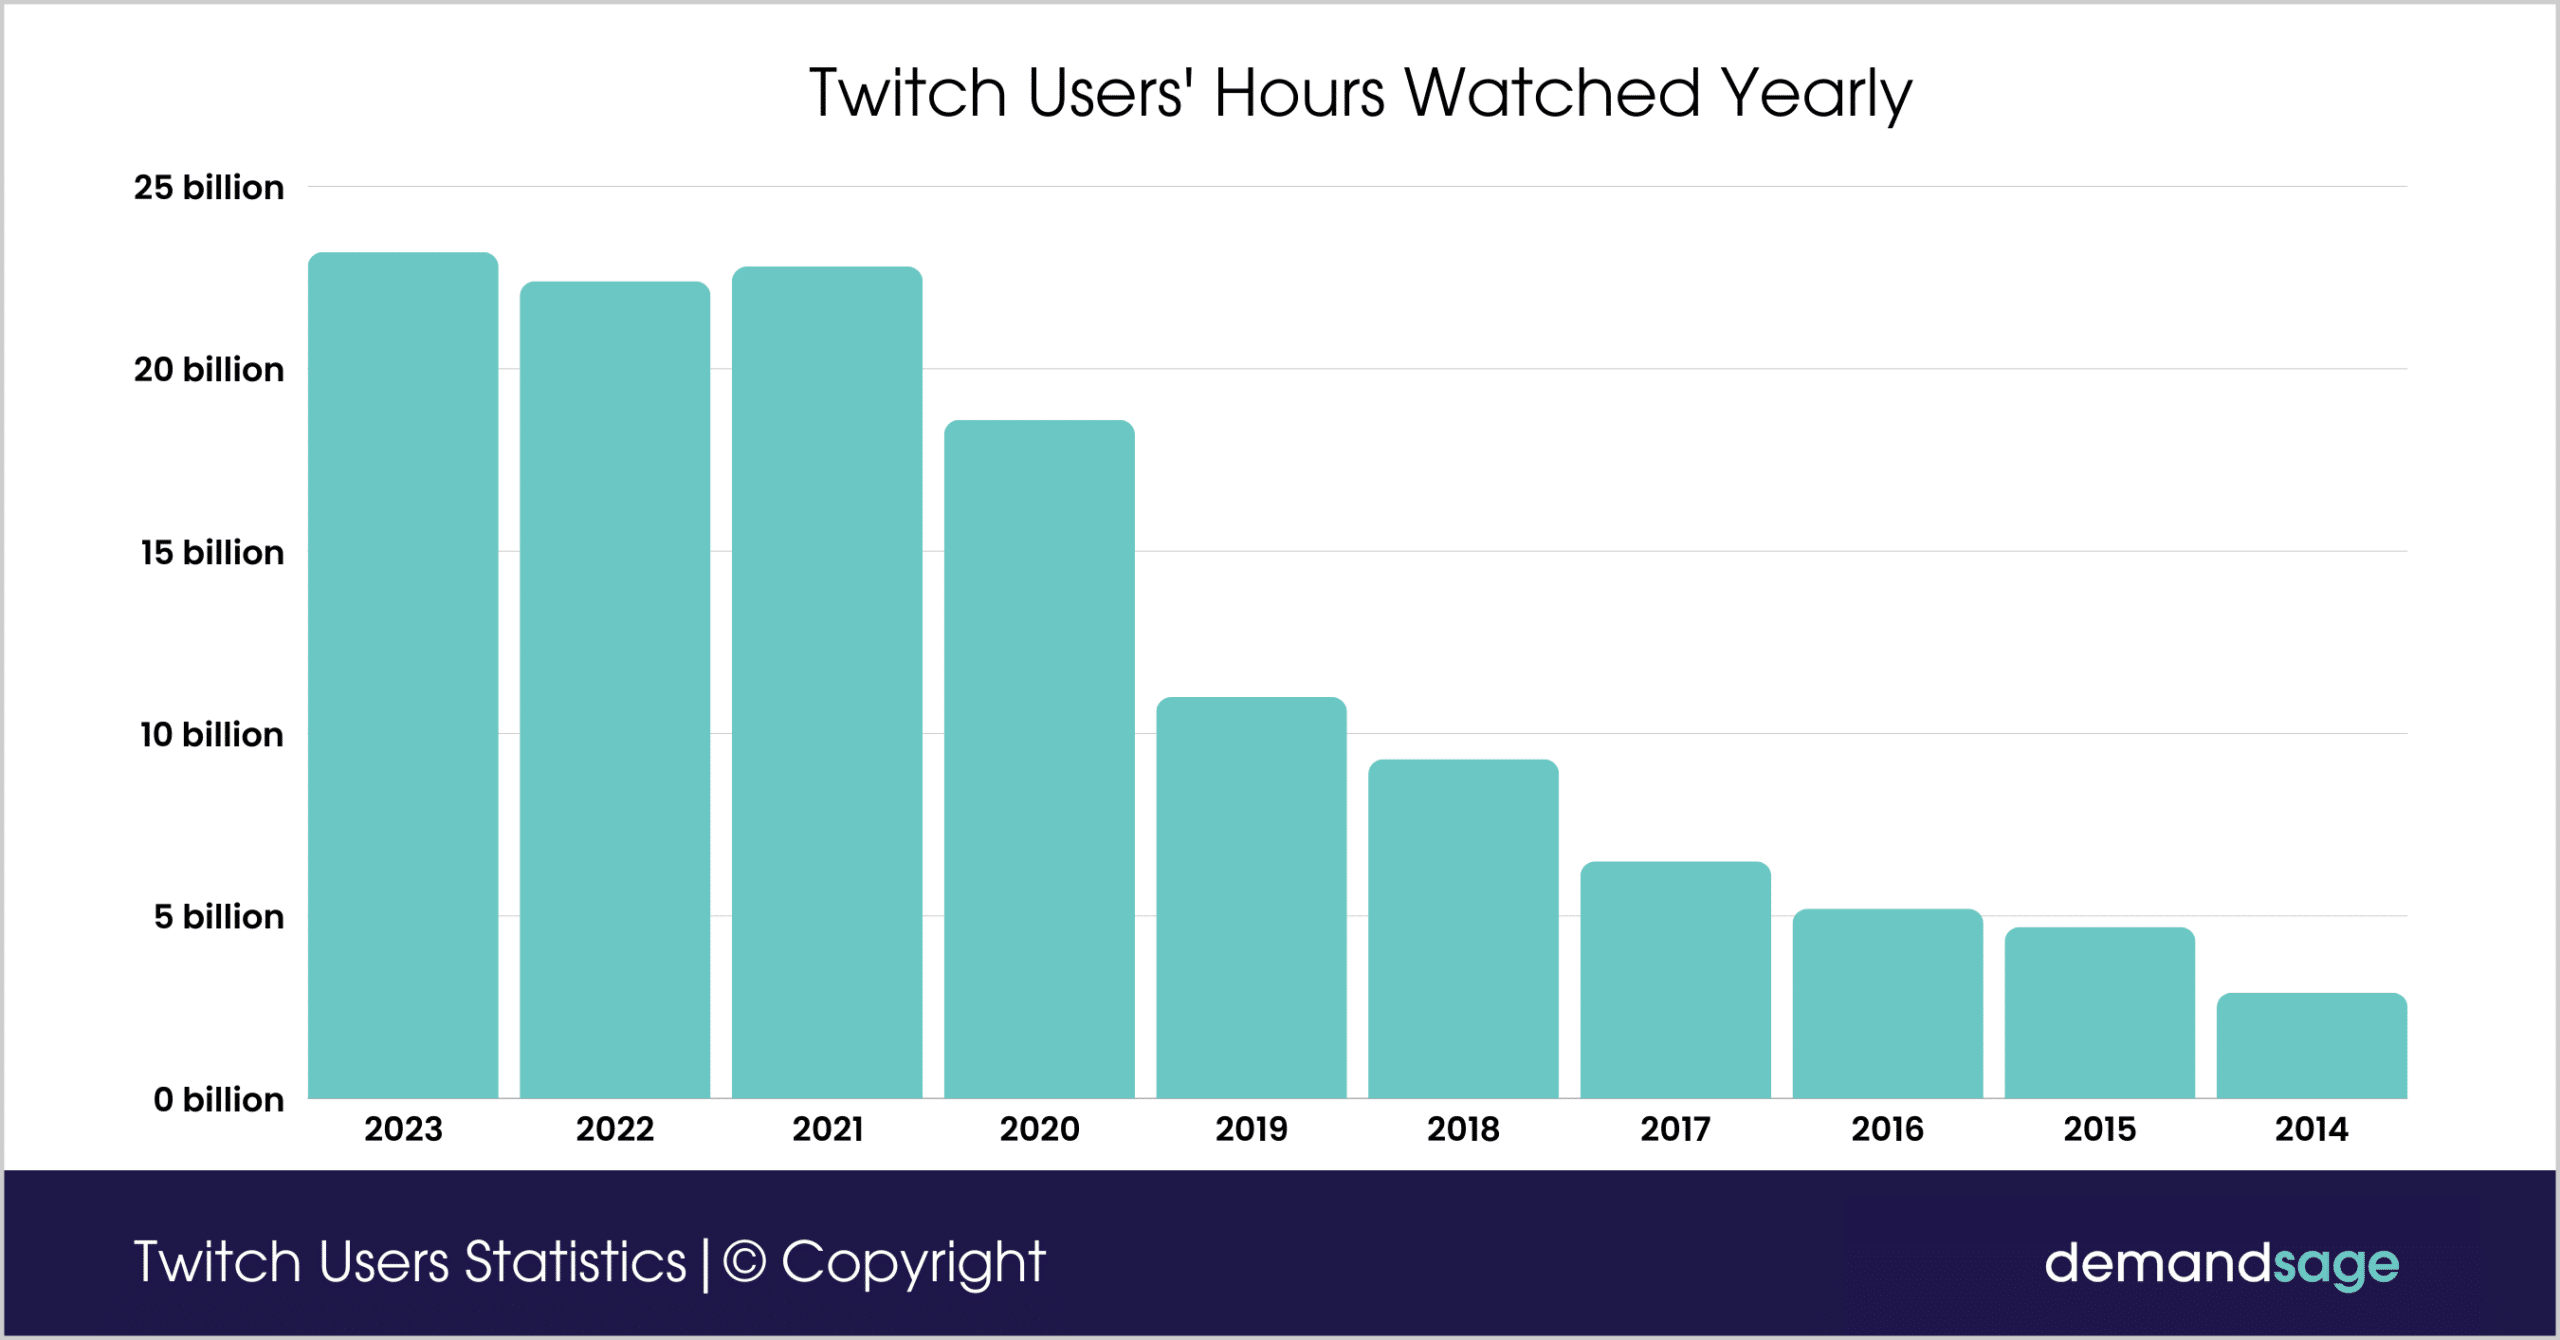 Twitch Users' Hours Watched Yearly